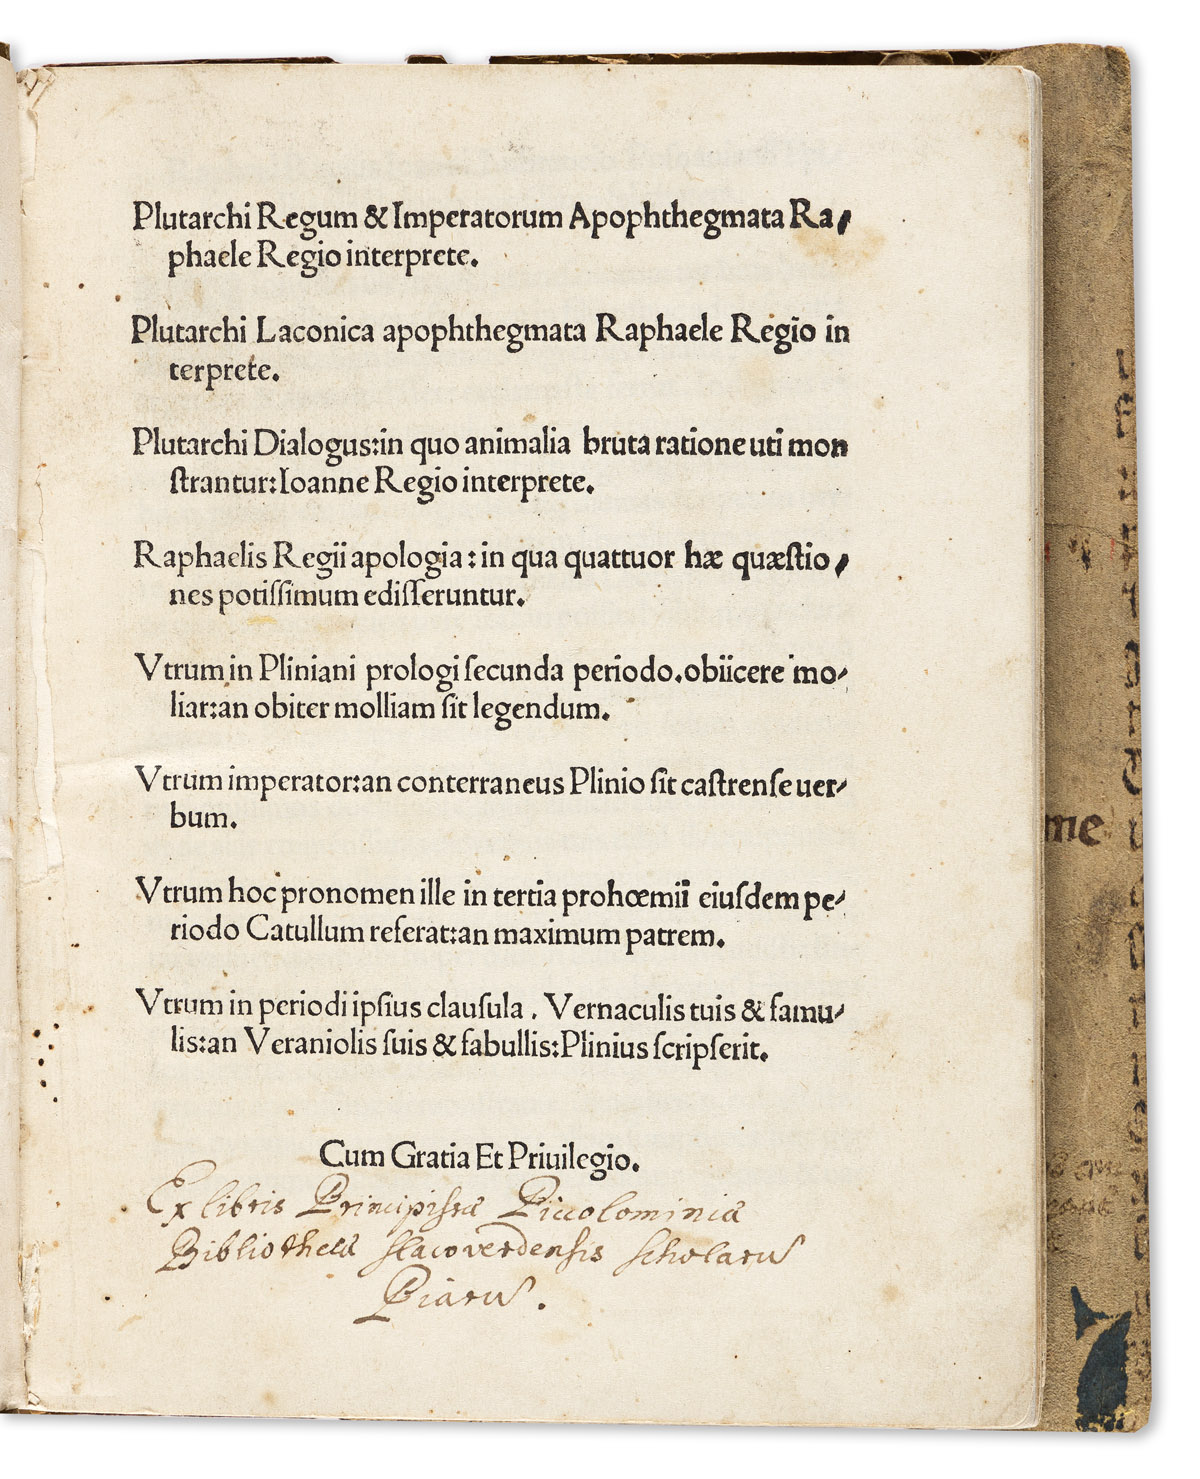 Plutarch, Pliny, Catullus, [and] Pomponius Laetus (1425-1497) Post-Incunabula Sammelband, 1508 & 1510.